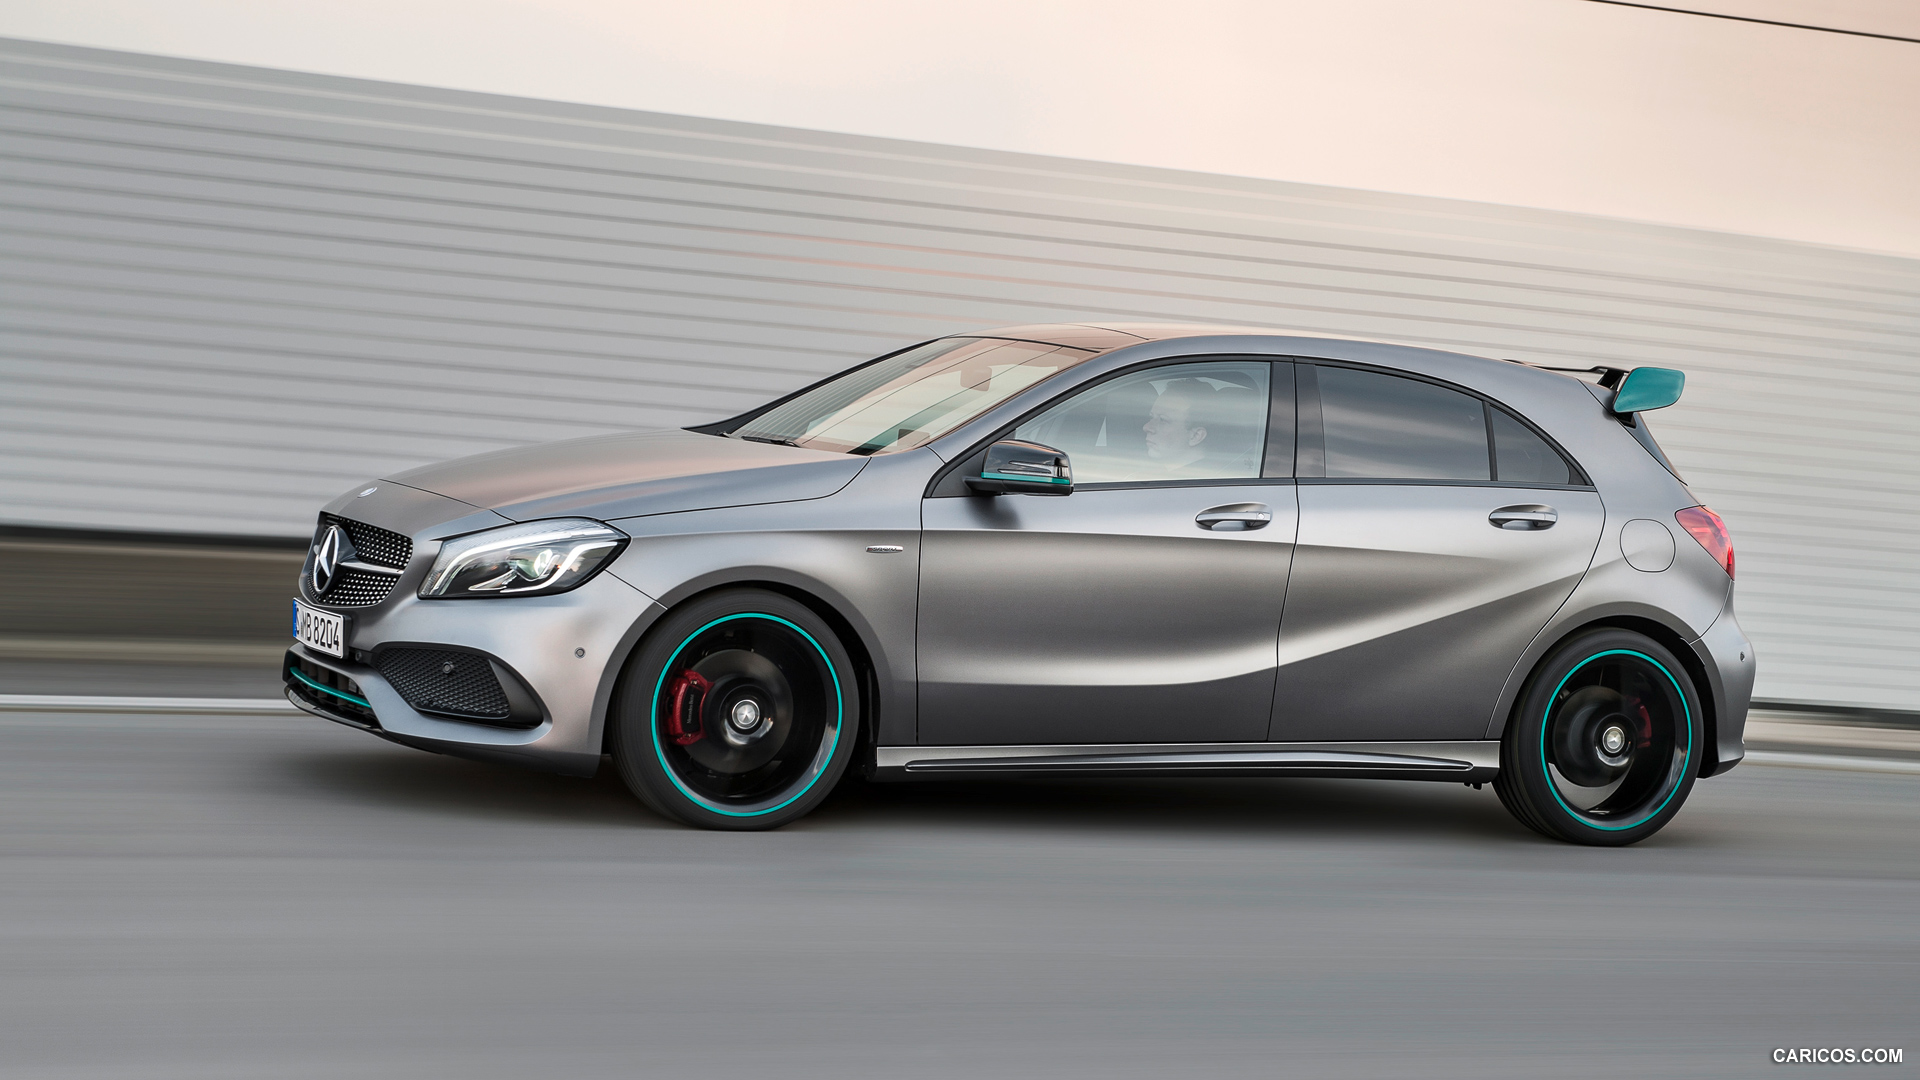 2016 Mercedes-Benz A-Class A 250 Motorsport Edition (Mountain Grey) - Side, #21 of 43